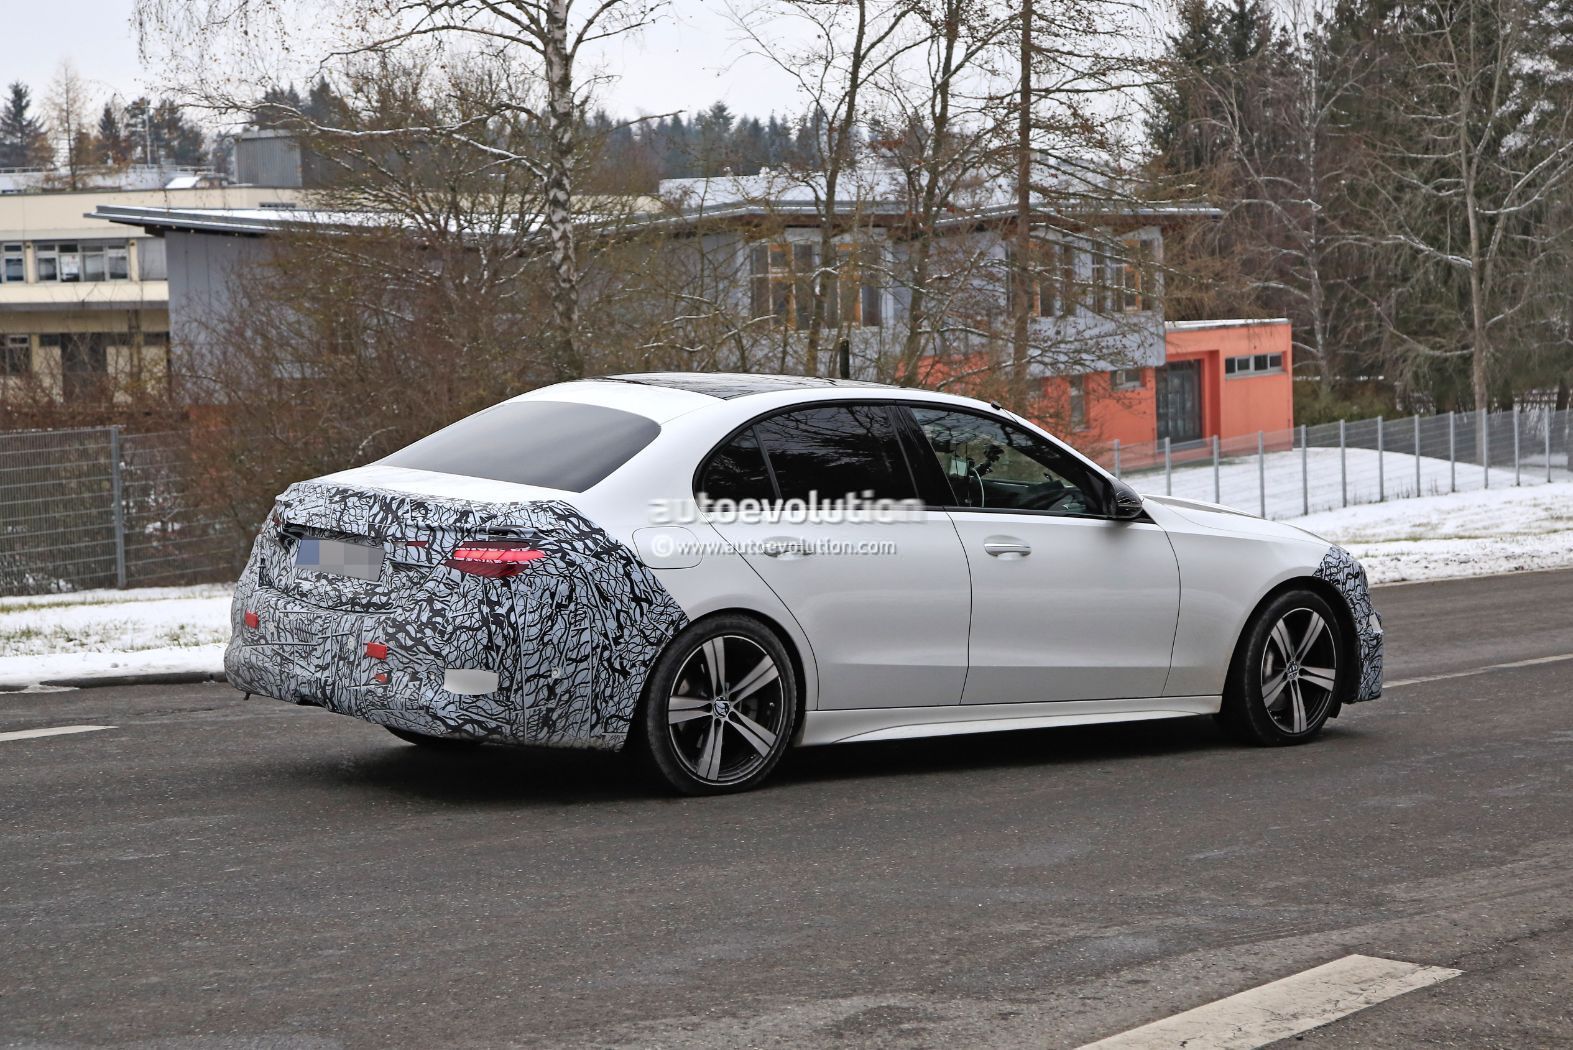 2022 Mercedes-Benz C-Class W206 Is Almost Here and It Looks Like a Mini S- Class - autoevolution